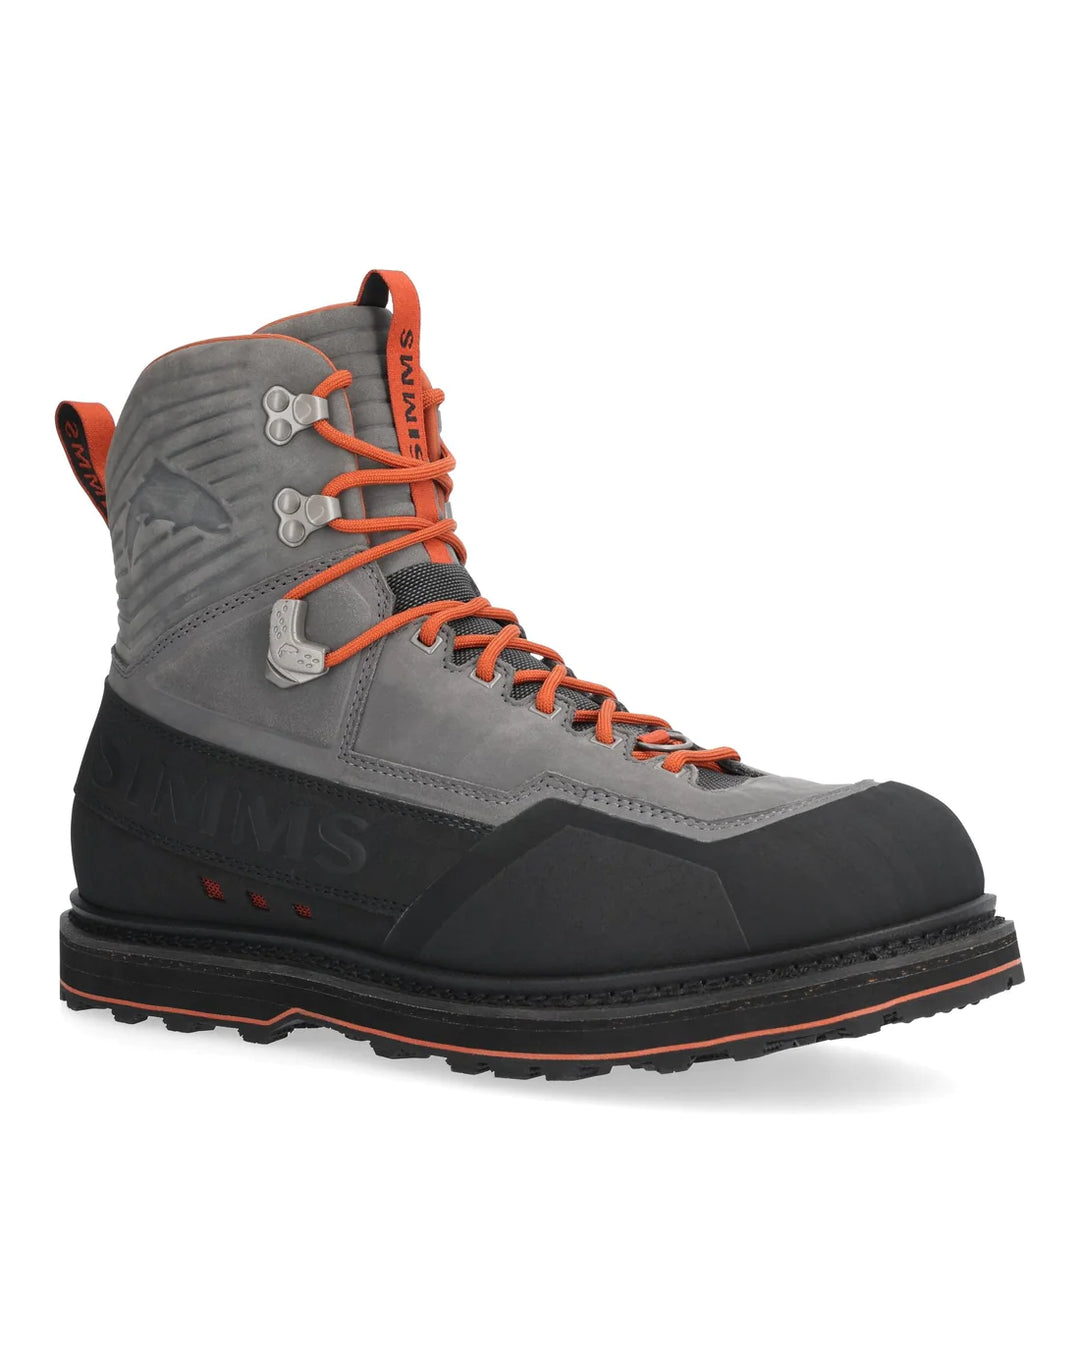 Simm's - M's G3 Guide Wading Boots - Vibram Sole - Slate